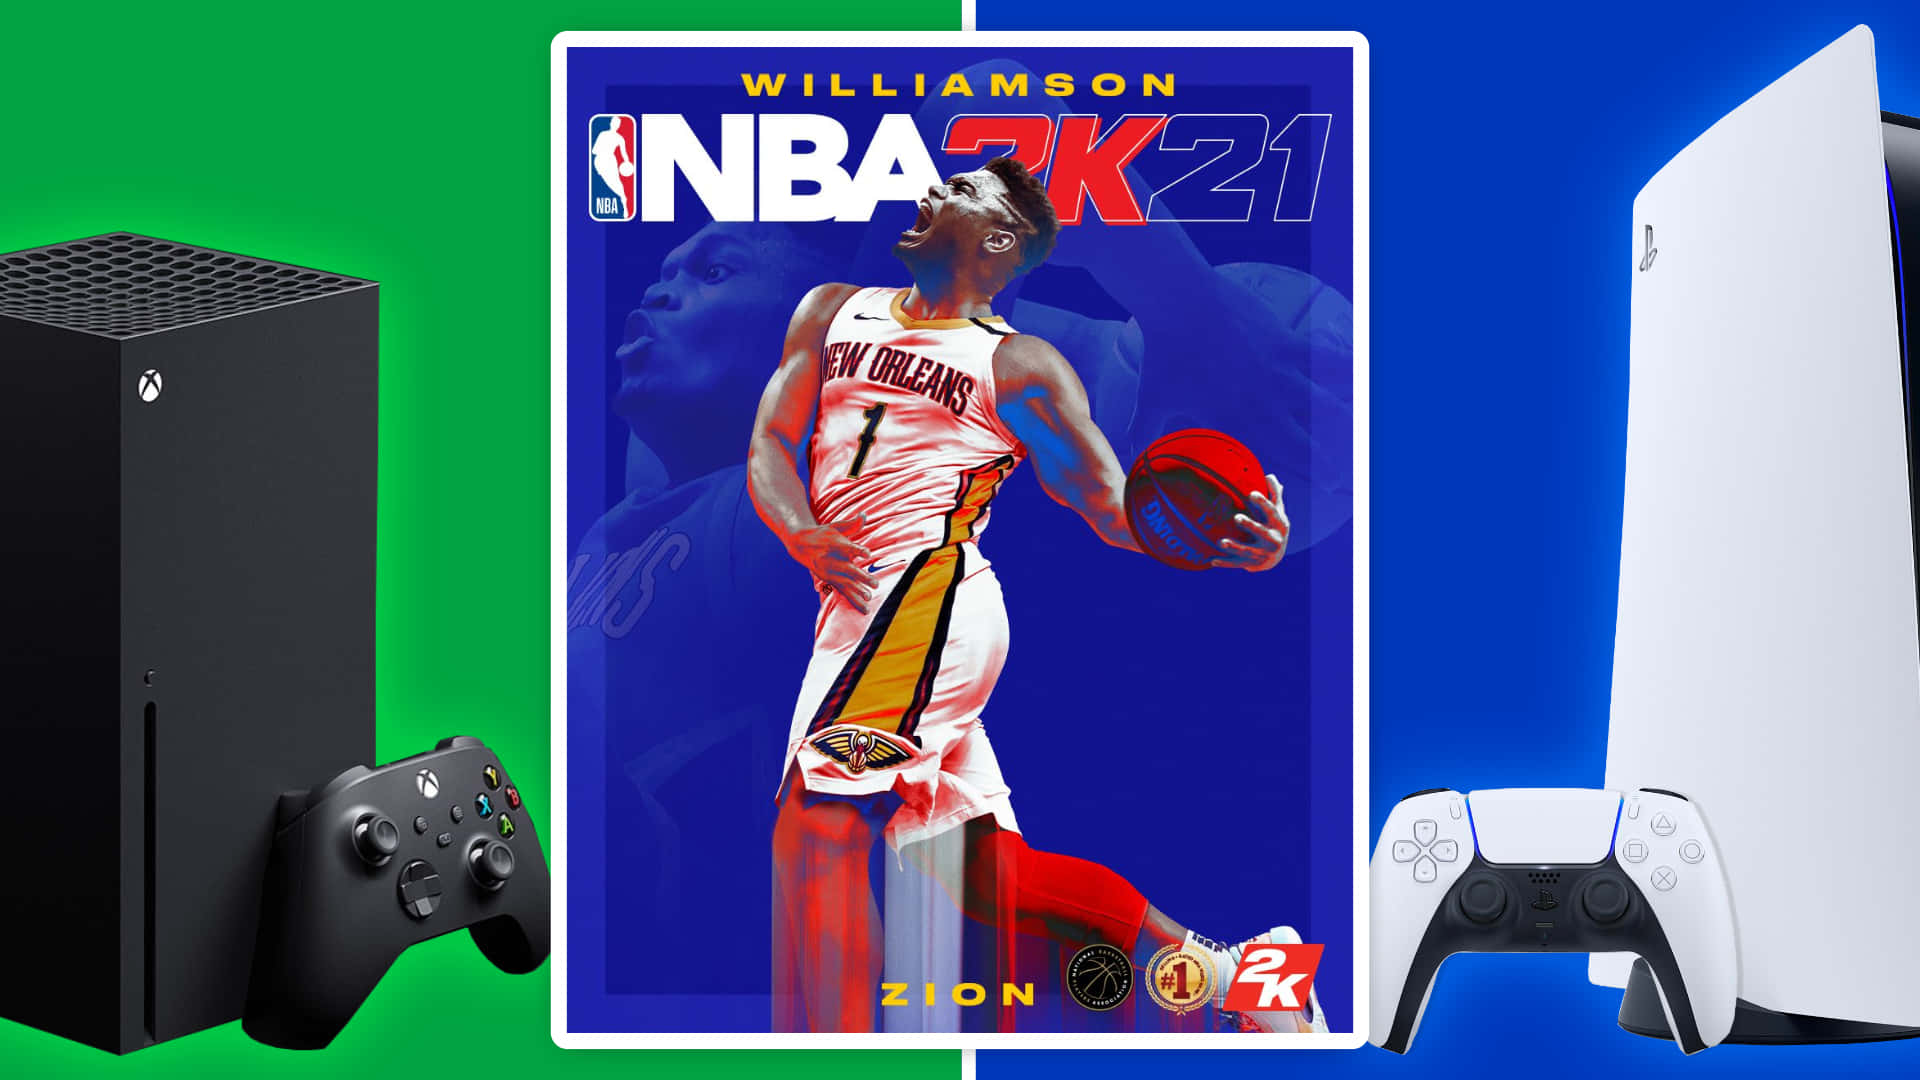 Take your NBA experience to the next level with NBA 2K21 Wallpaper